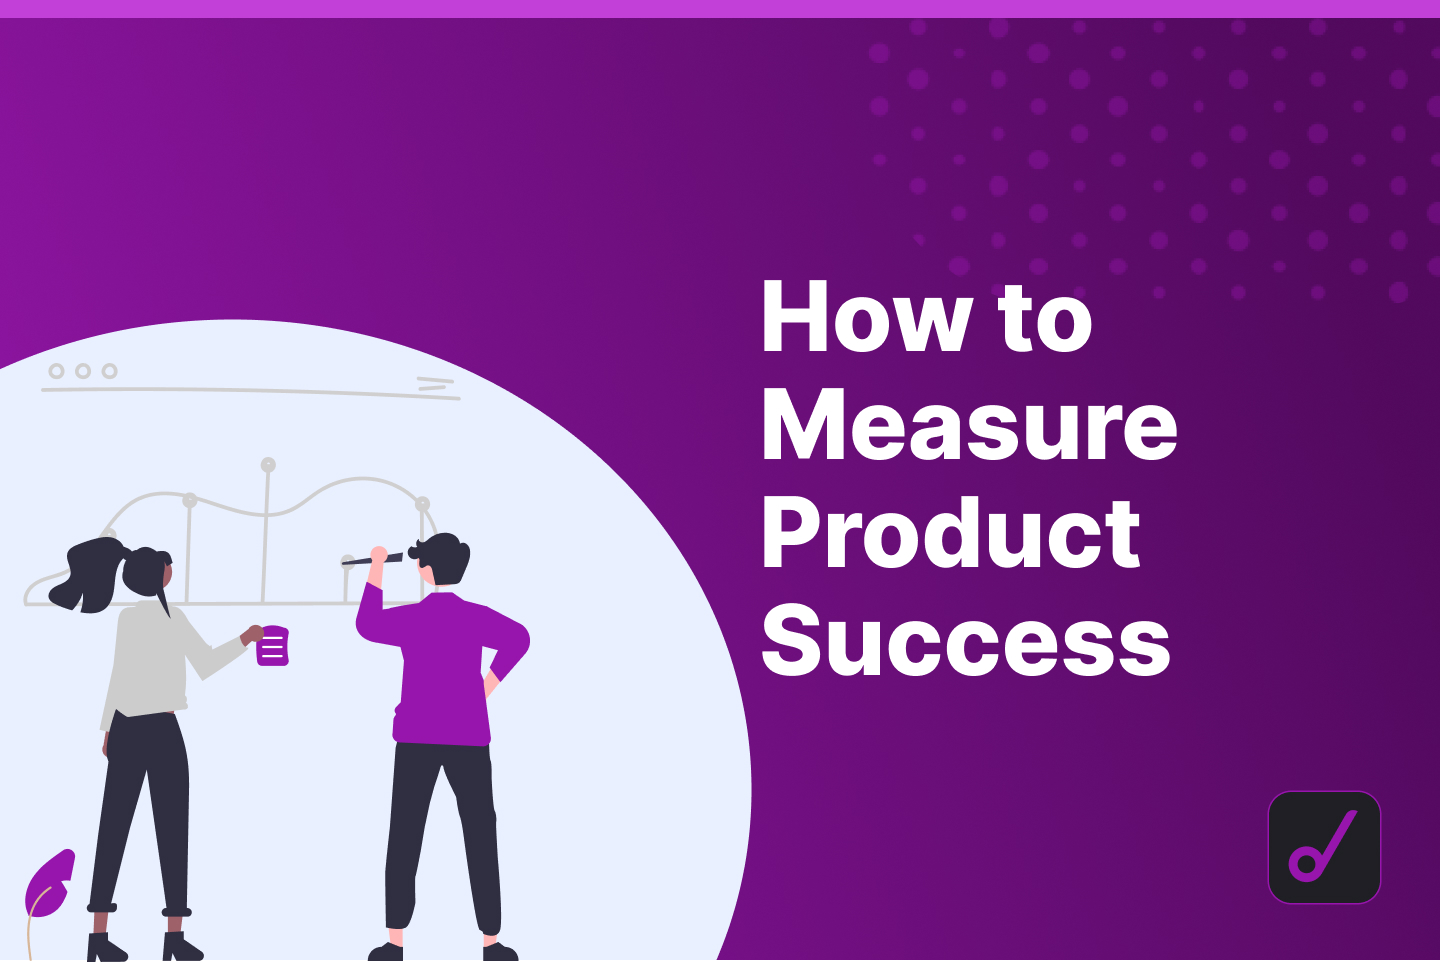 How to Measure Product Success